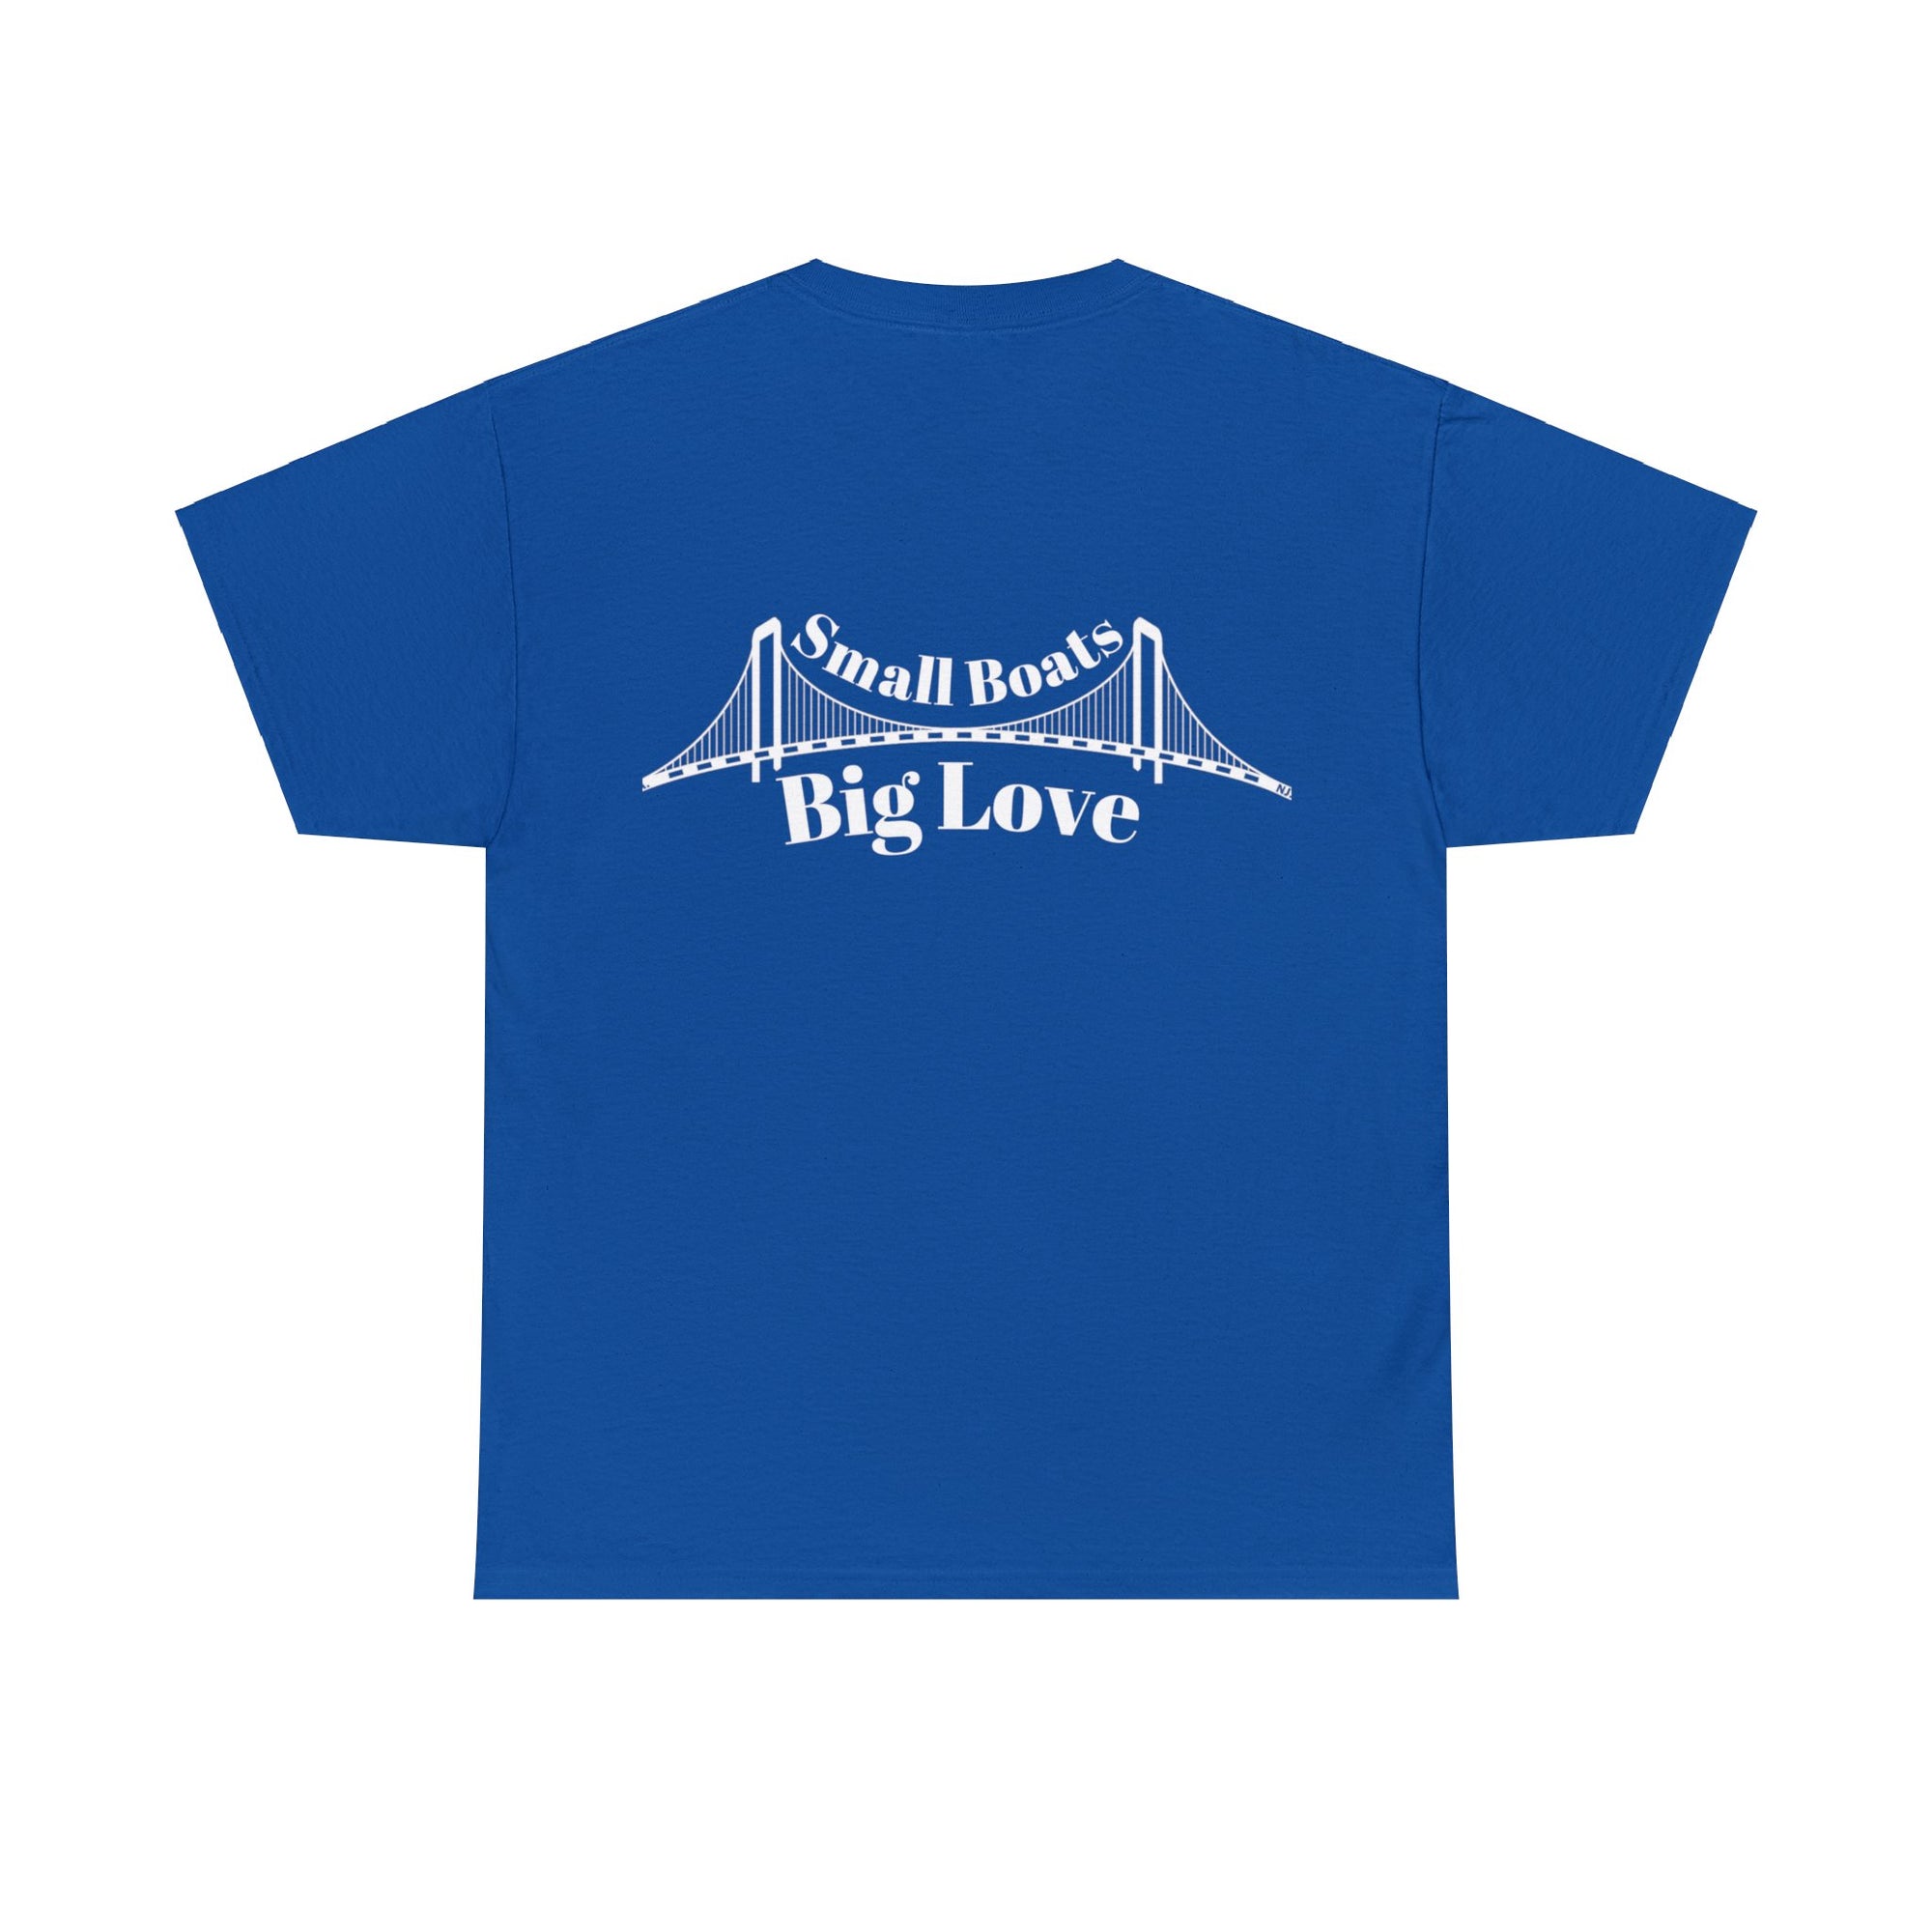 Small Boats, Big Love T-shirt (limited edition)